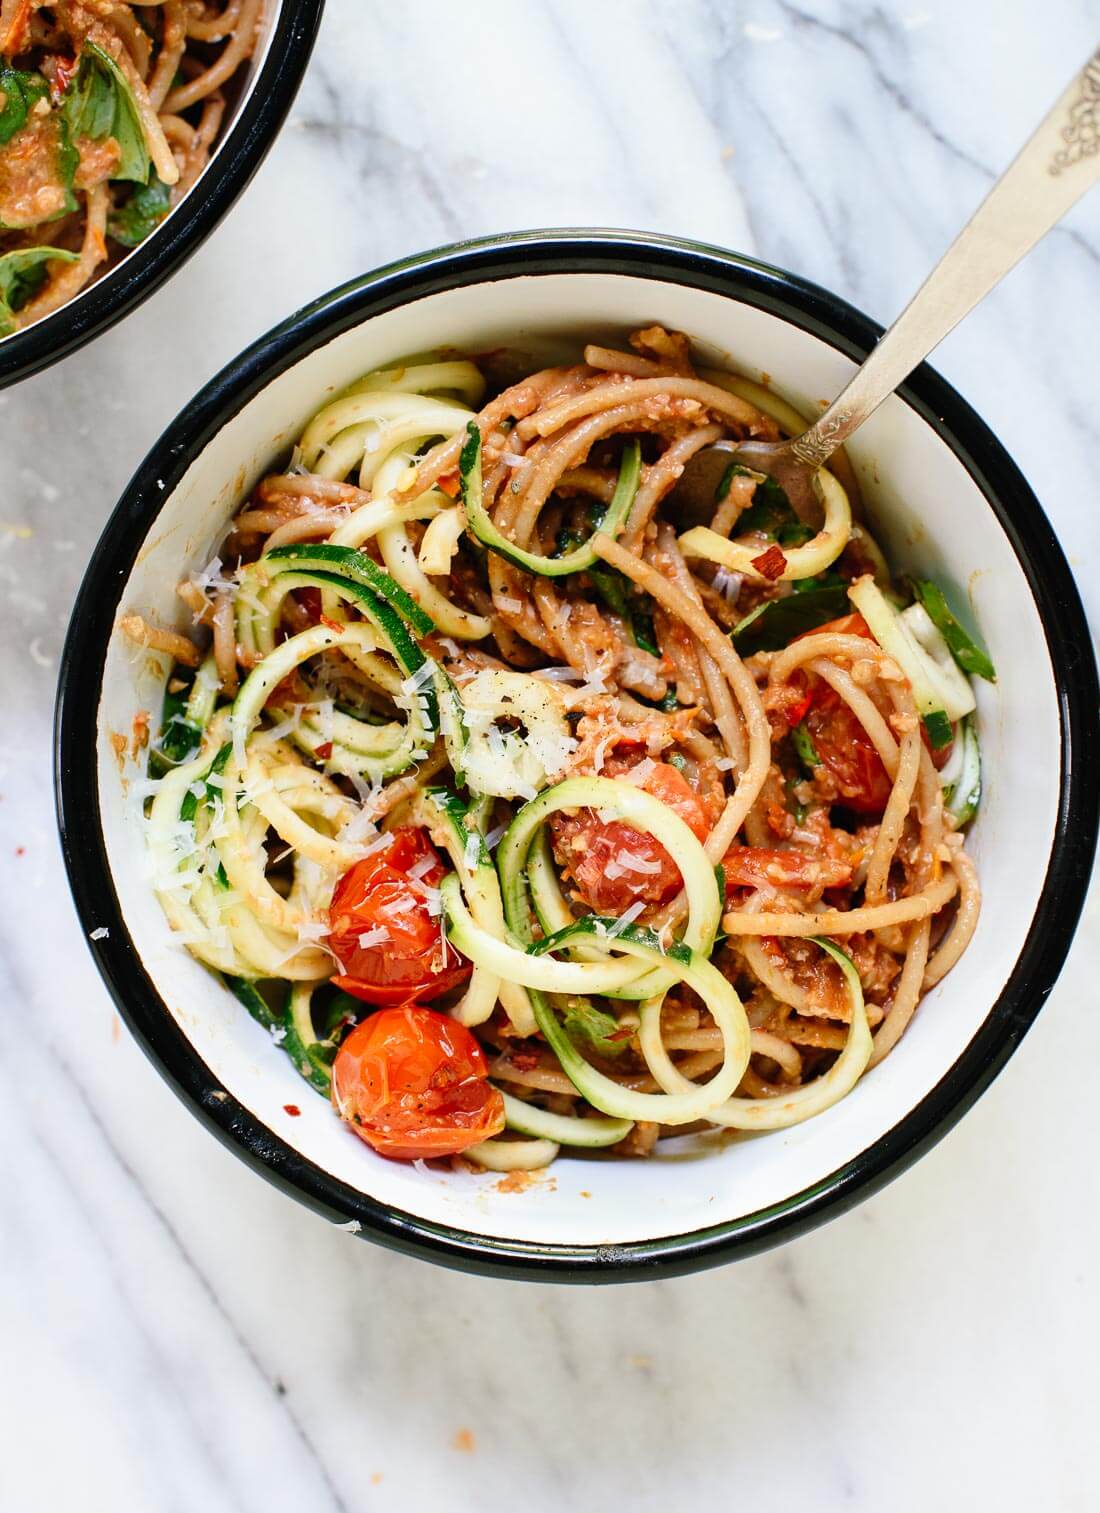 Double Tomato Pesto Spaghetti with Zucchini Noodles from cookieandkate.com on foodiecrush.com